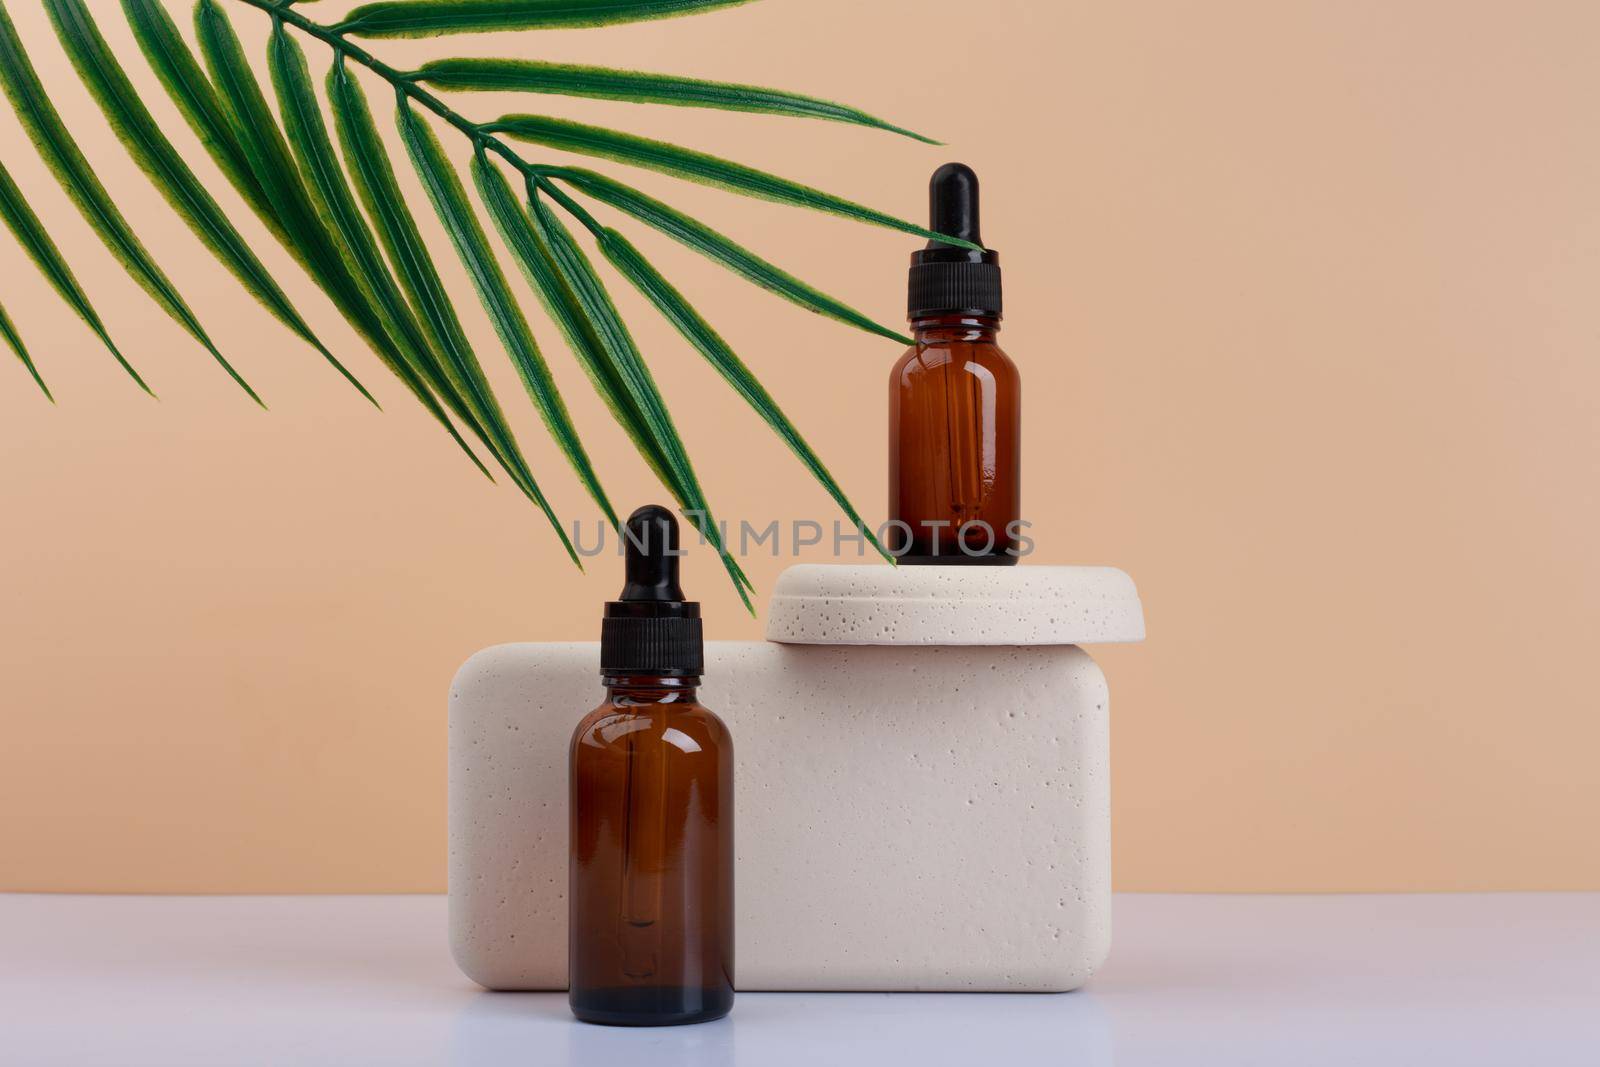 Two dark transparent glass bottles with skin serum or oil for manicure on gypsum podium against beige background with palm leaf by Senorina_Irina